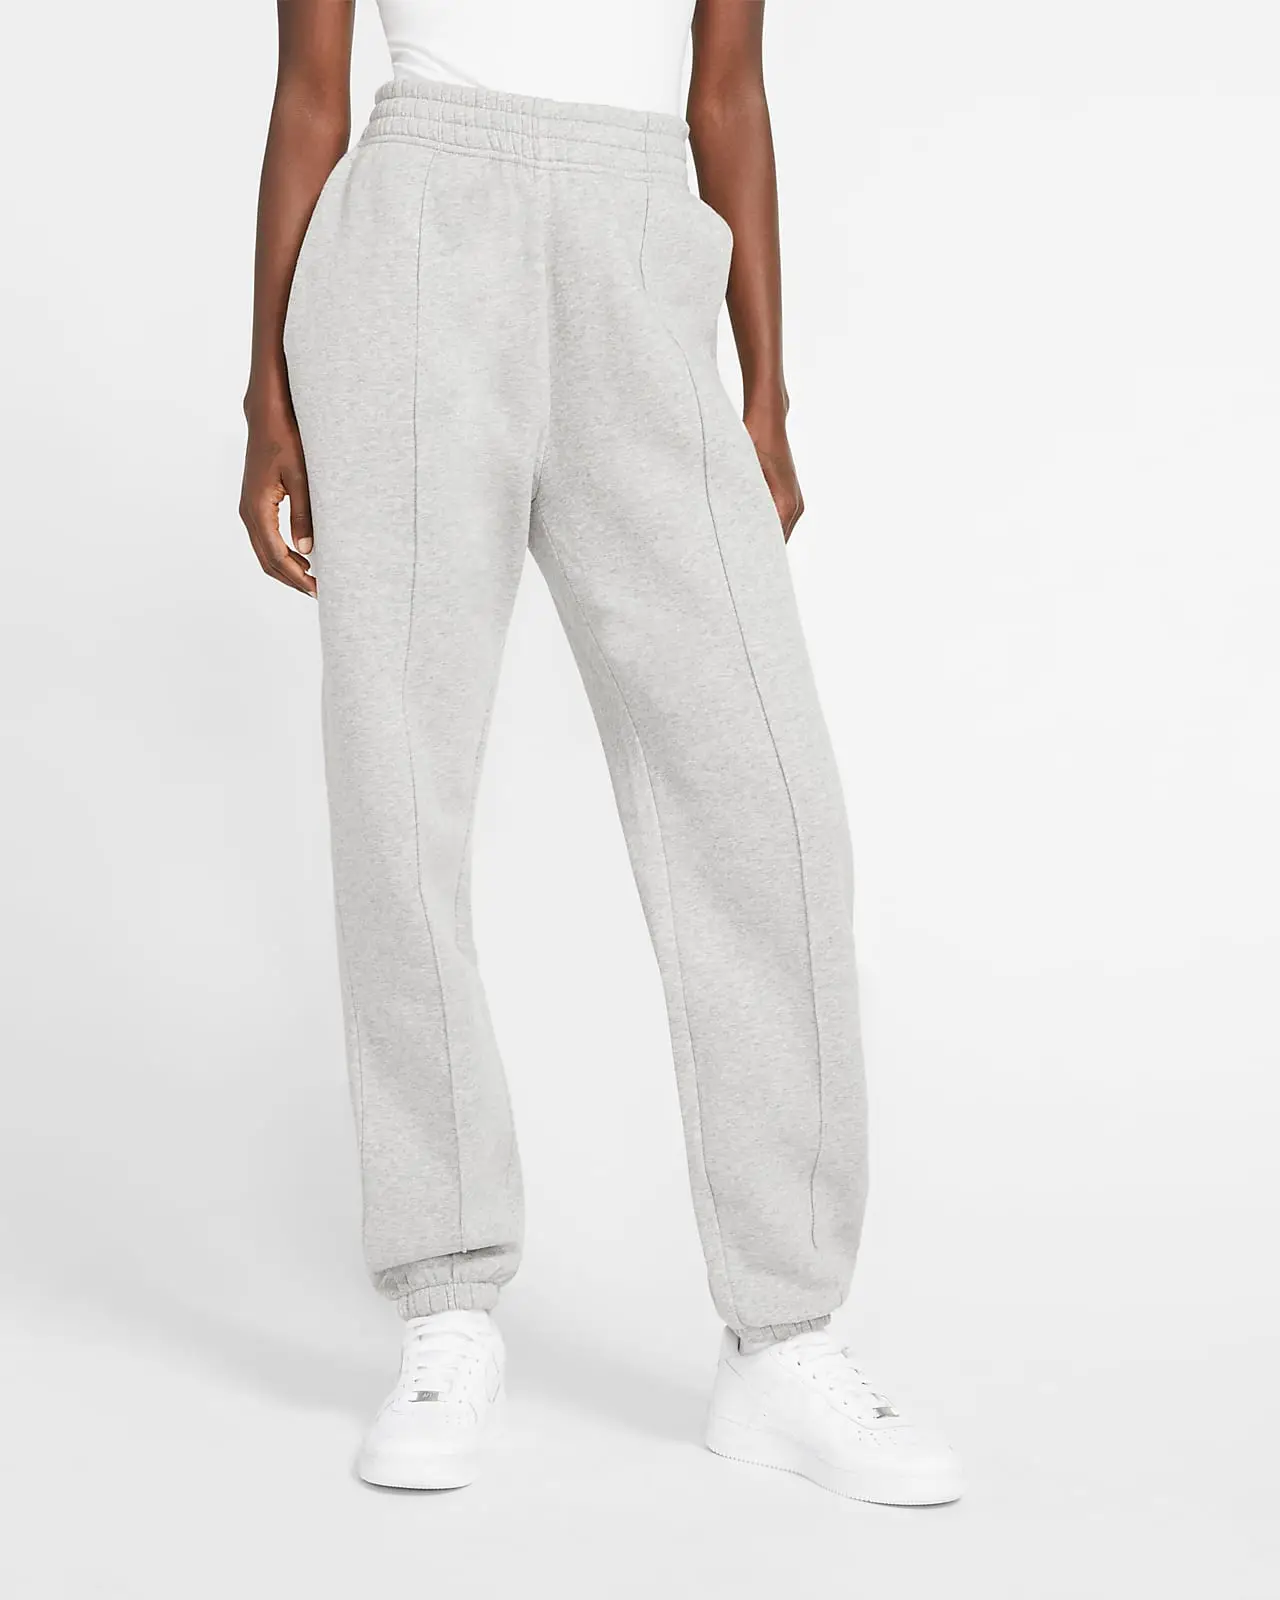 19 Cosy Sweatpants To Style With Your Sneakers | The Sole Supplier